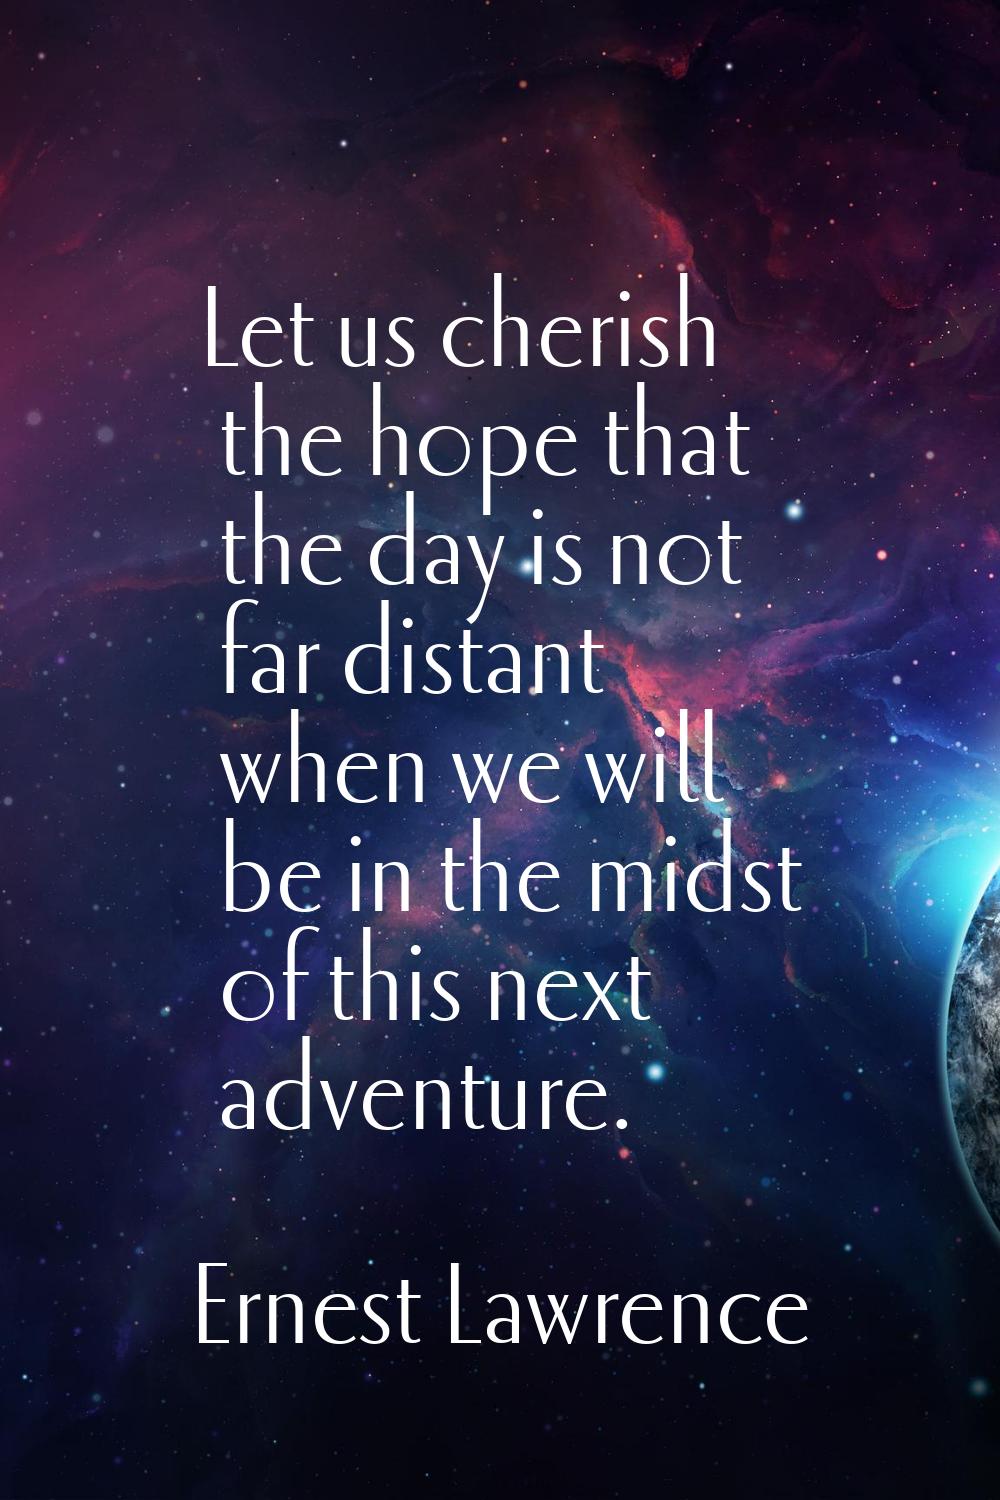 Let us cherish the hope that the day is not far distant when we will be in the midst of this next a